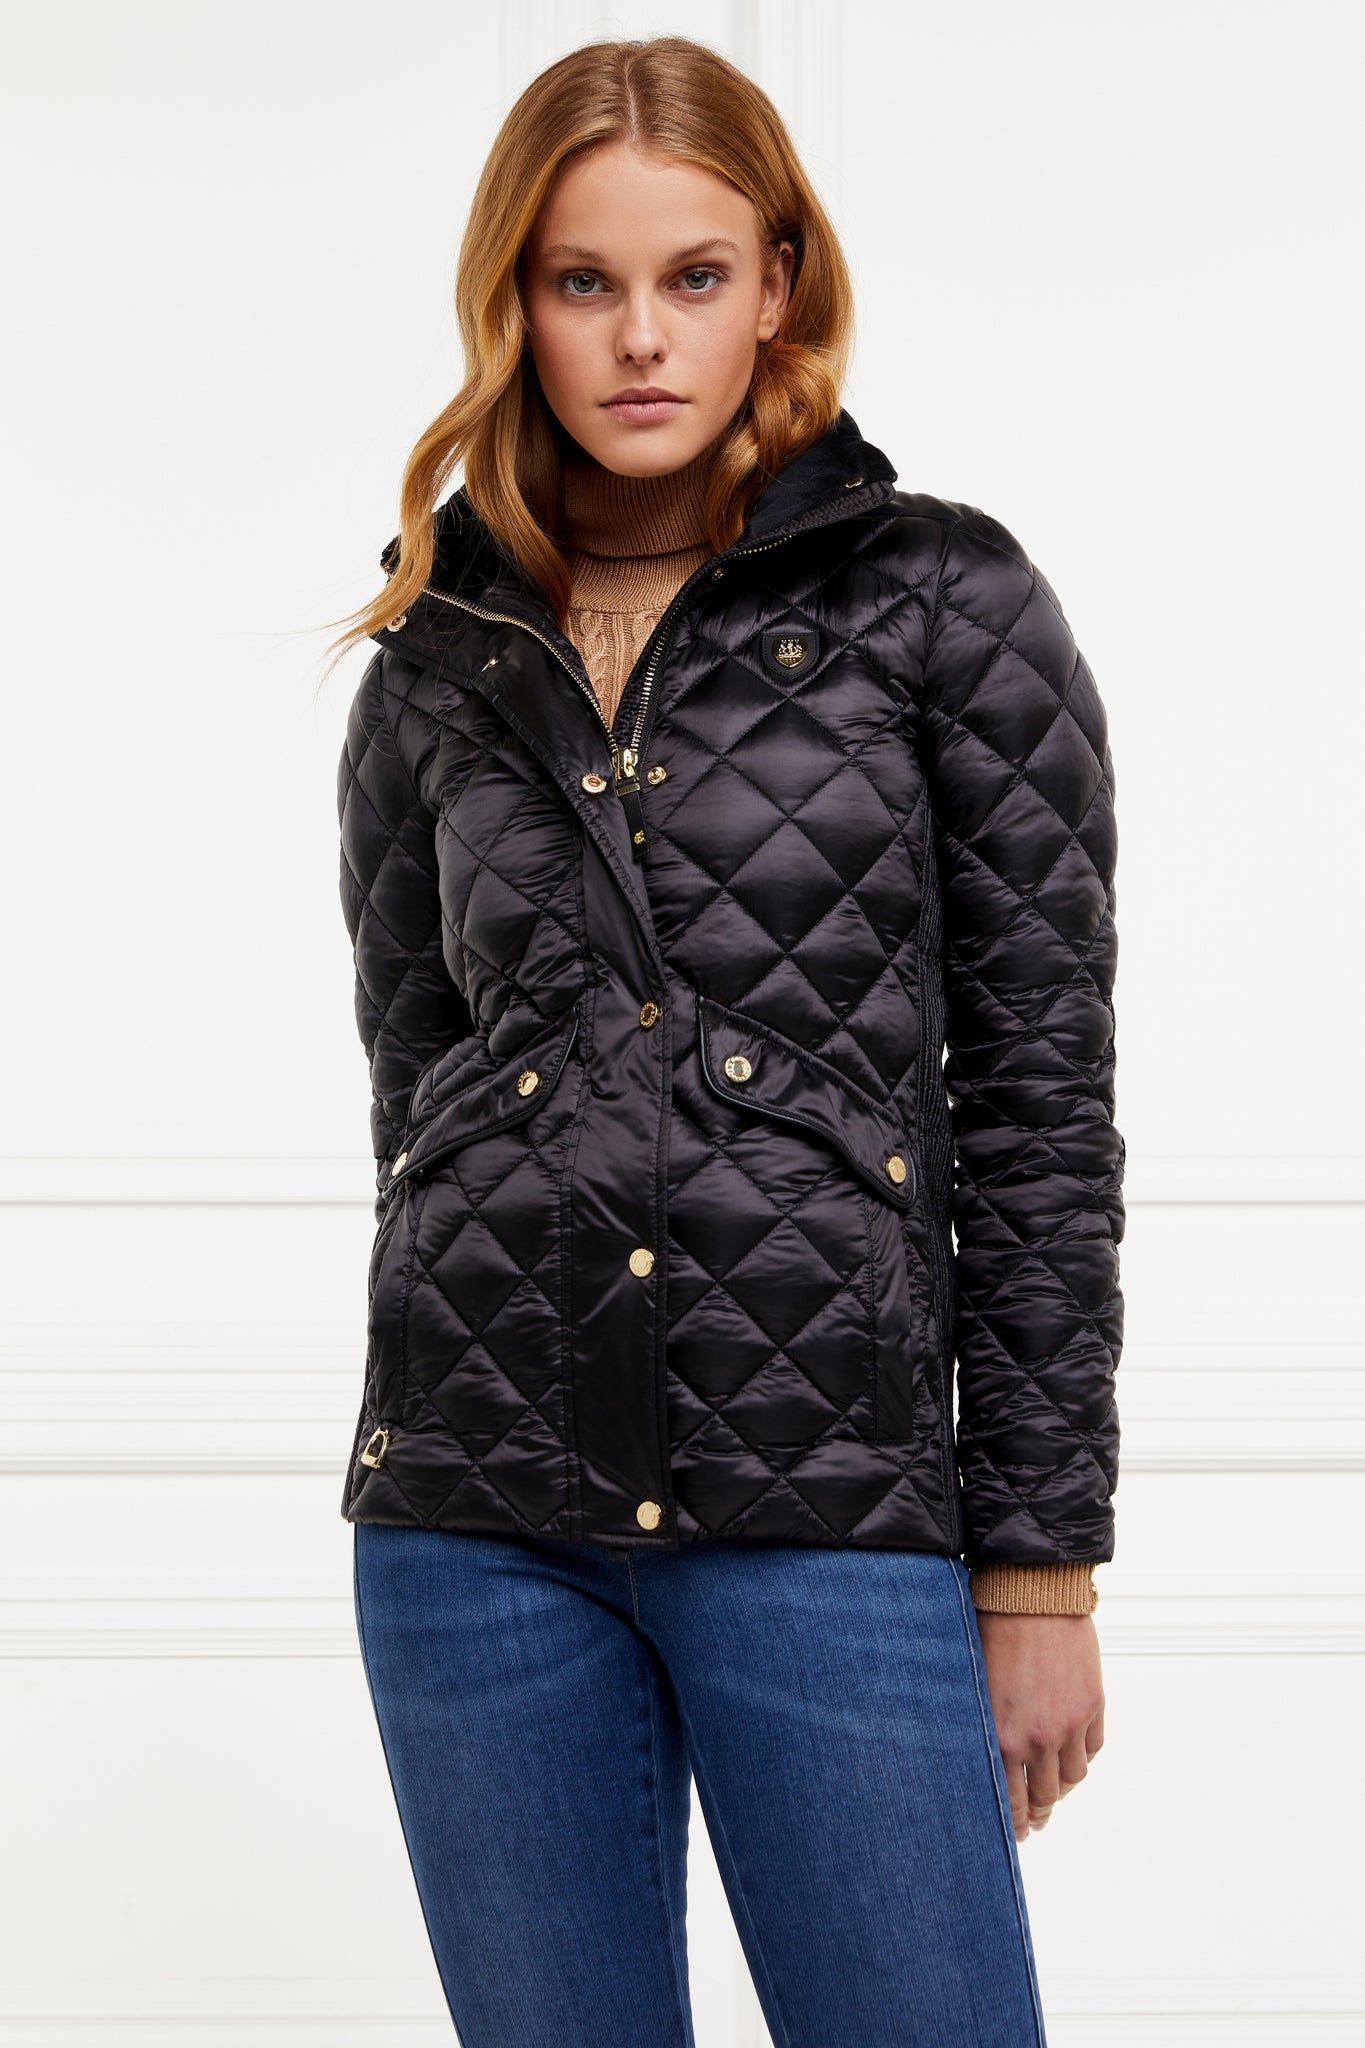 womens diamond quilted black jacket with contrast black leather elbow and shoulder pads large front pockets and shirred side panels